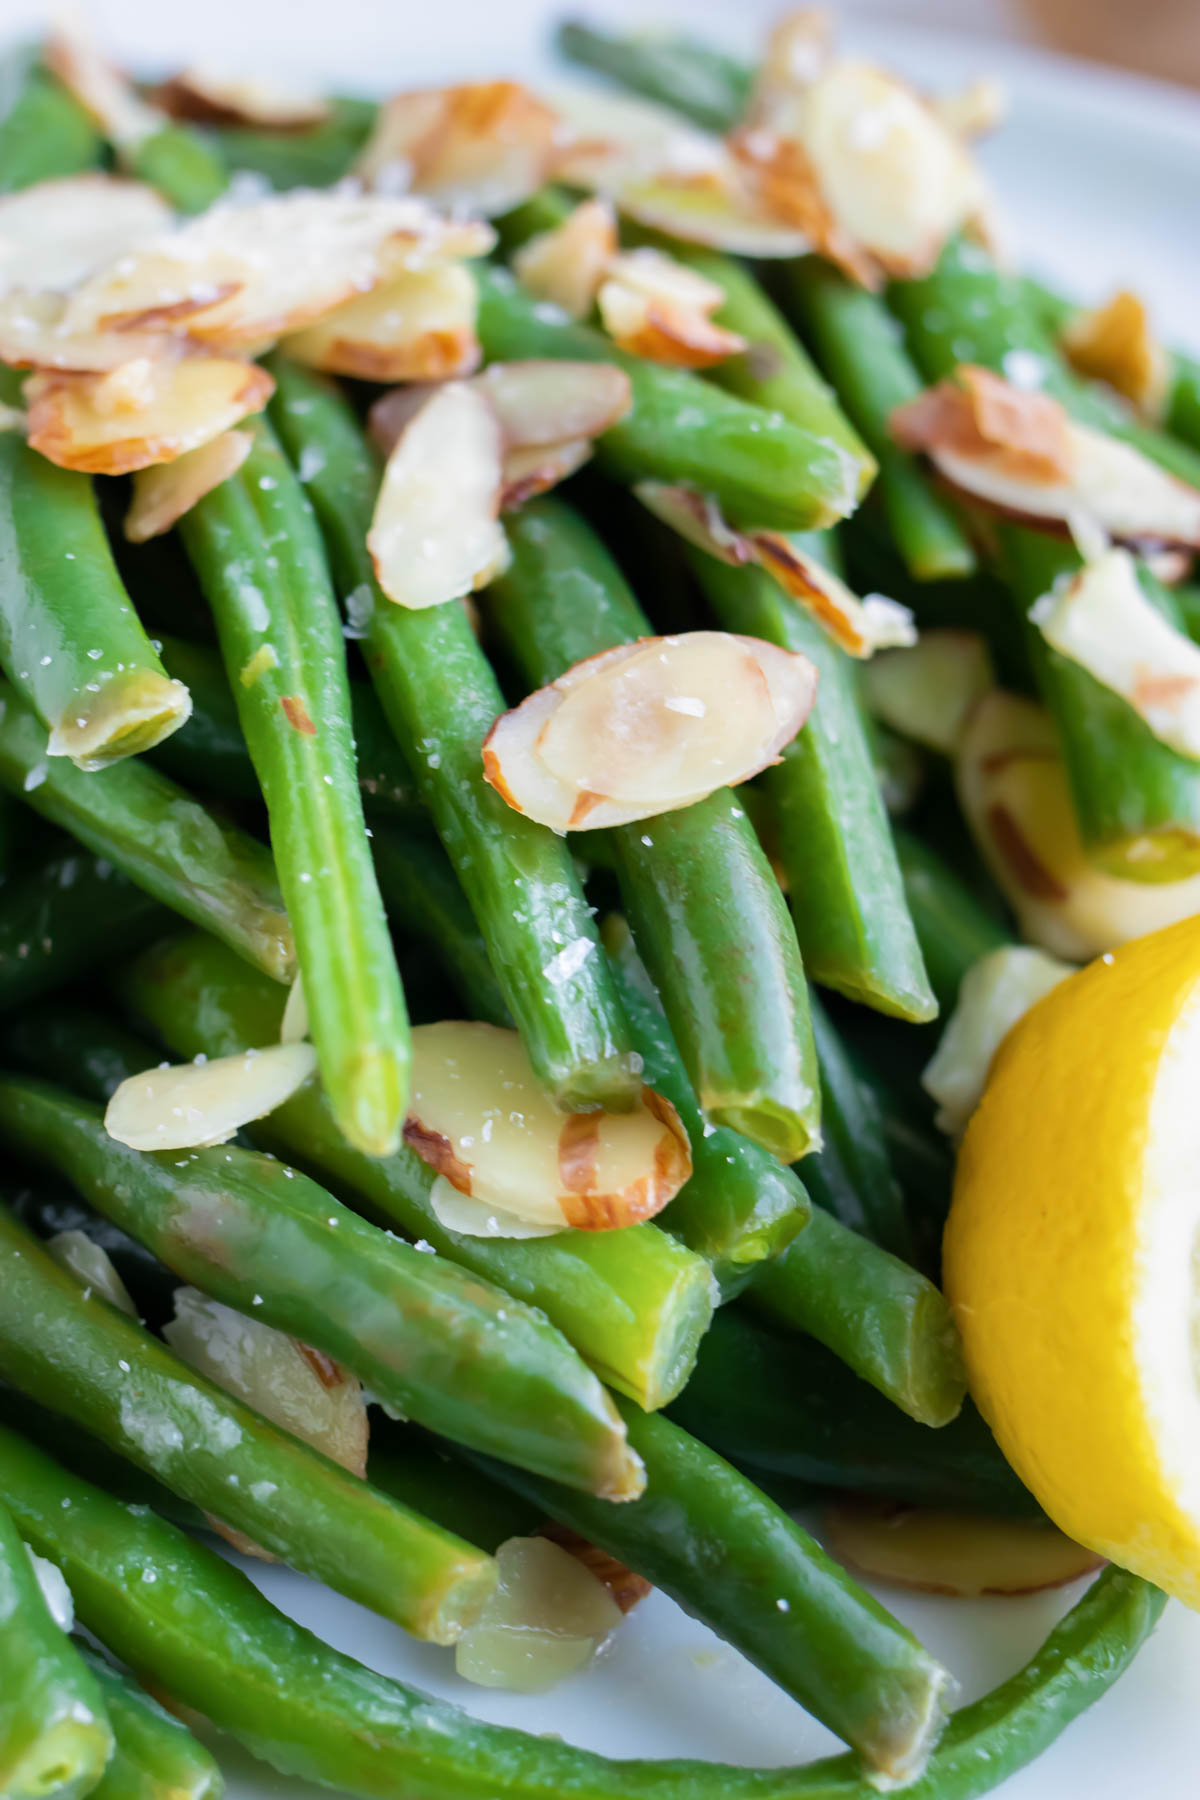 Sliced almonds on top of boiled and blanched green beans with lemon juice.